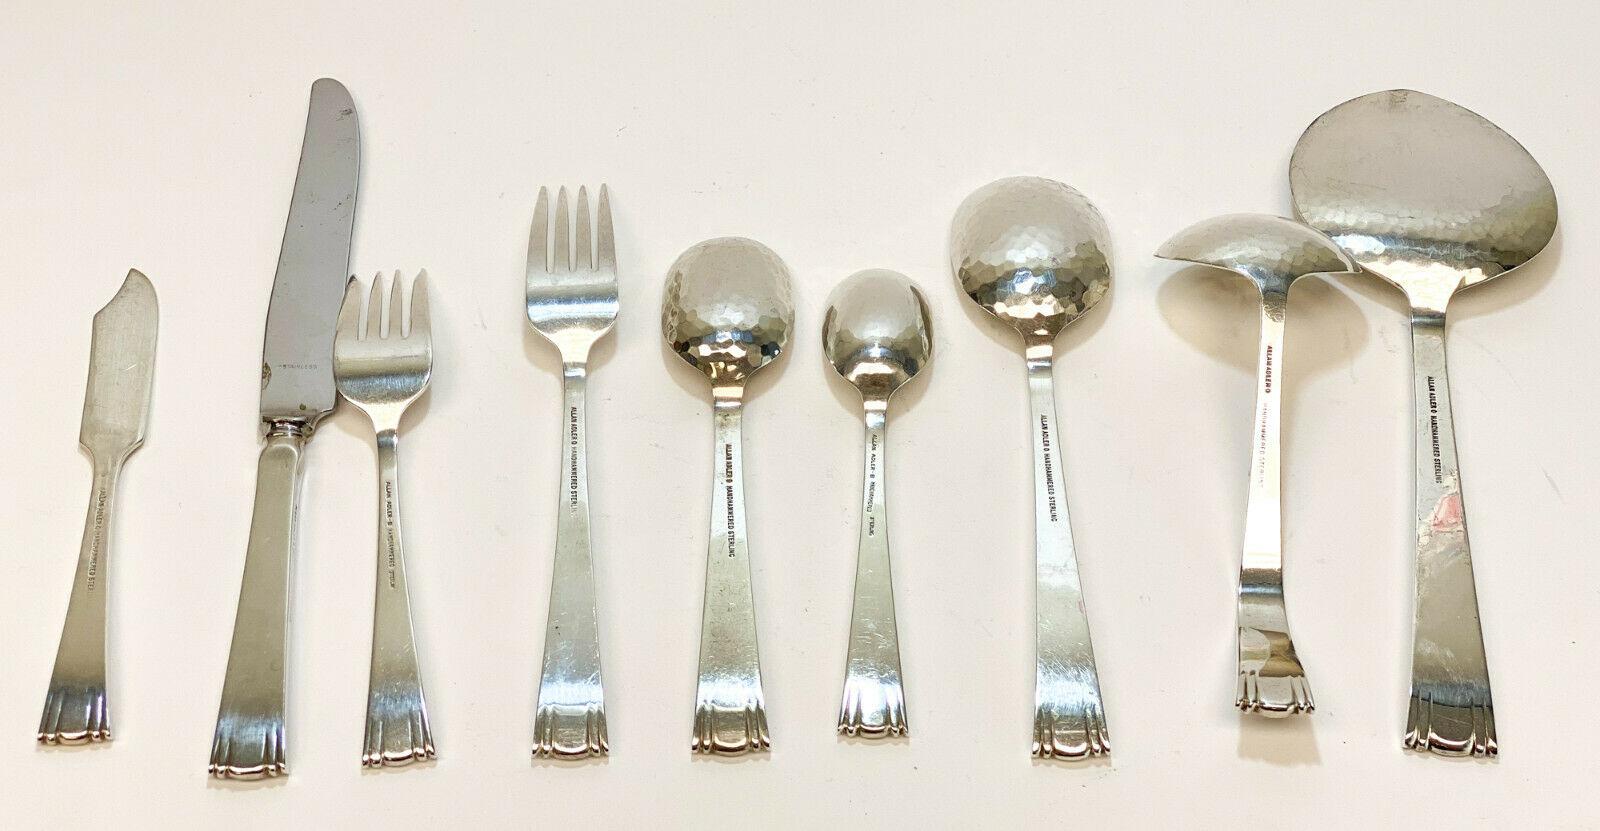 6 piece Allan Adler sterling silver flatware service for 10 in Modern Georgian, Issued 1970. Lightly hand-hammered with a modernist scroll design to the ends of the handles. Marked Allan Adler to the verso.

The service includes:
- 1 serving